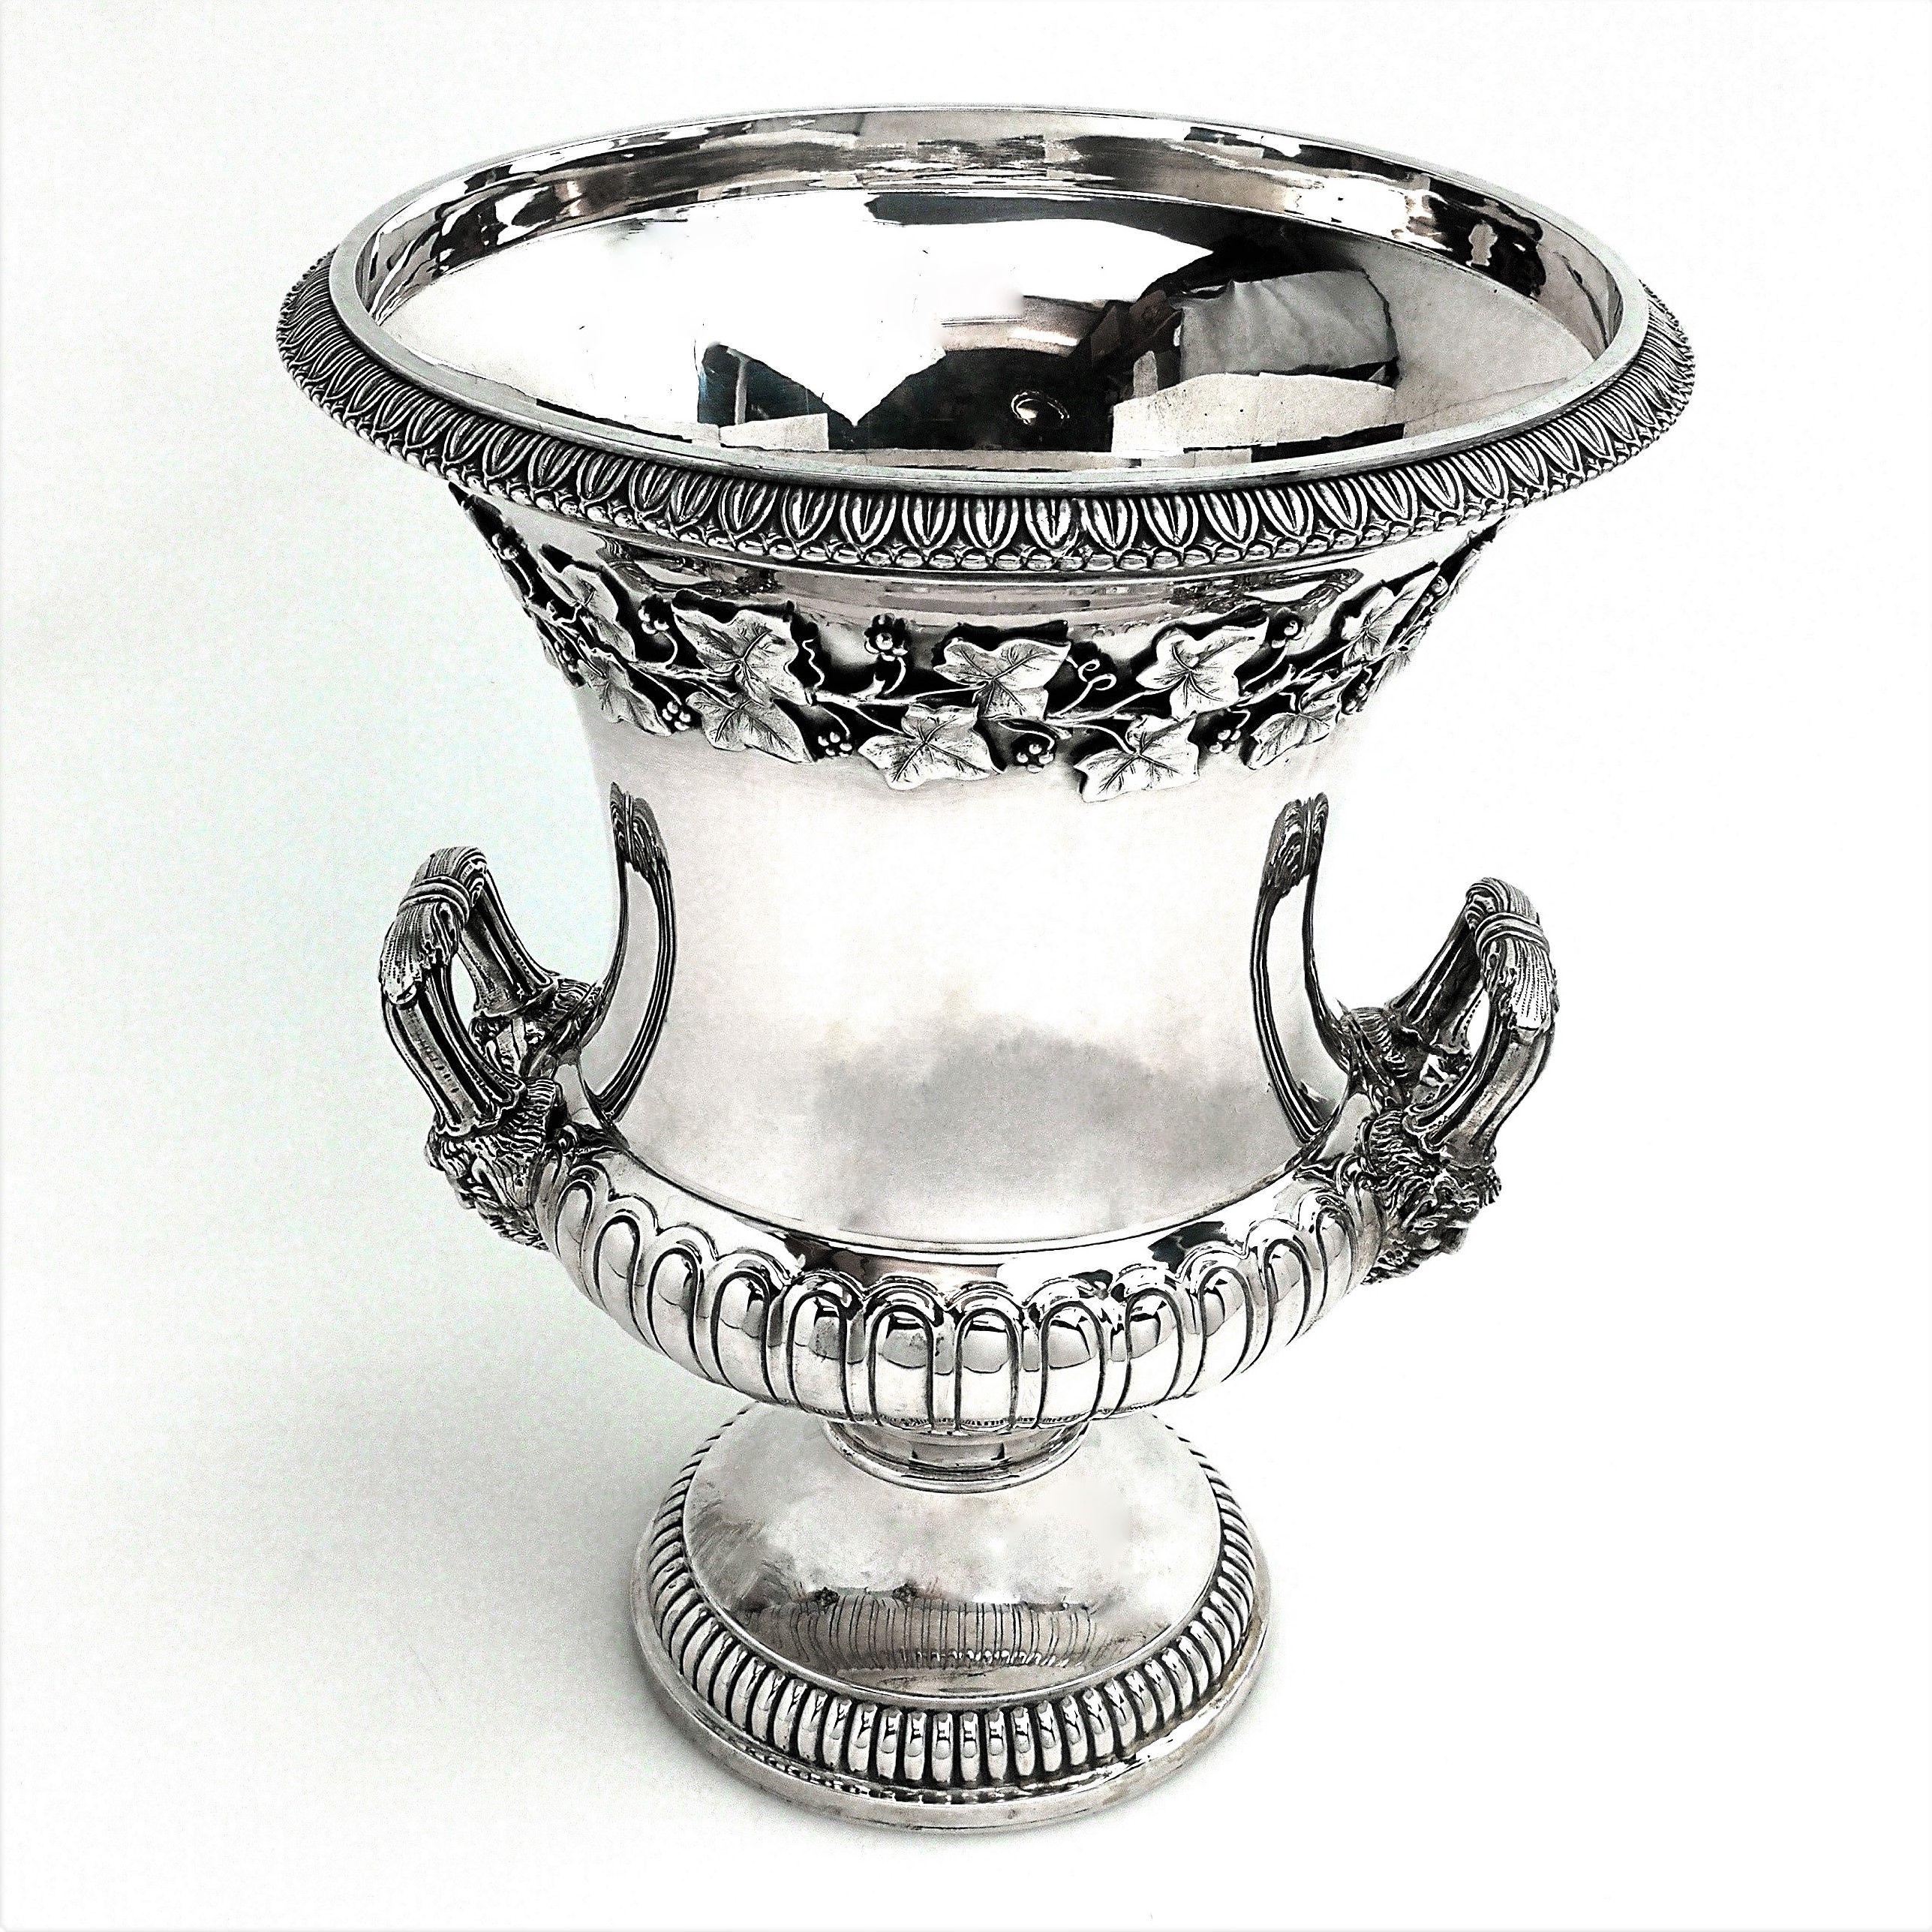 An impressive vintage Italian solid silver champagne cooler or wine ice bucket. This cooler has an elegant fluted shape withe a wide everted rim. The cooler stands on a pedestal foot and has two handles. This wine cooler is decorated with an applied